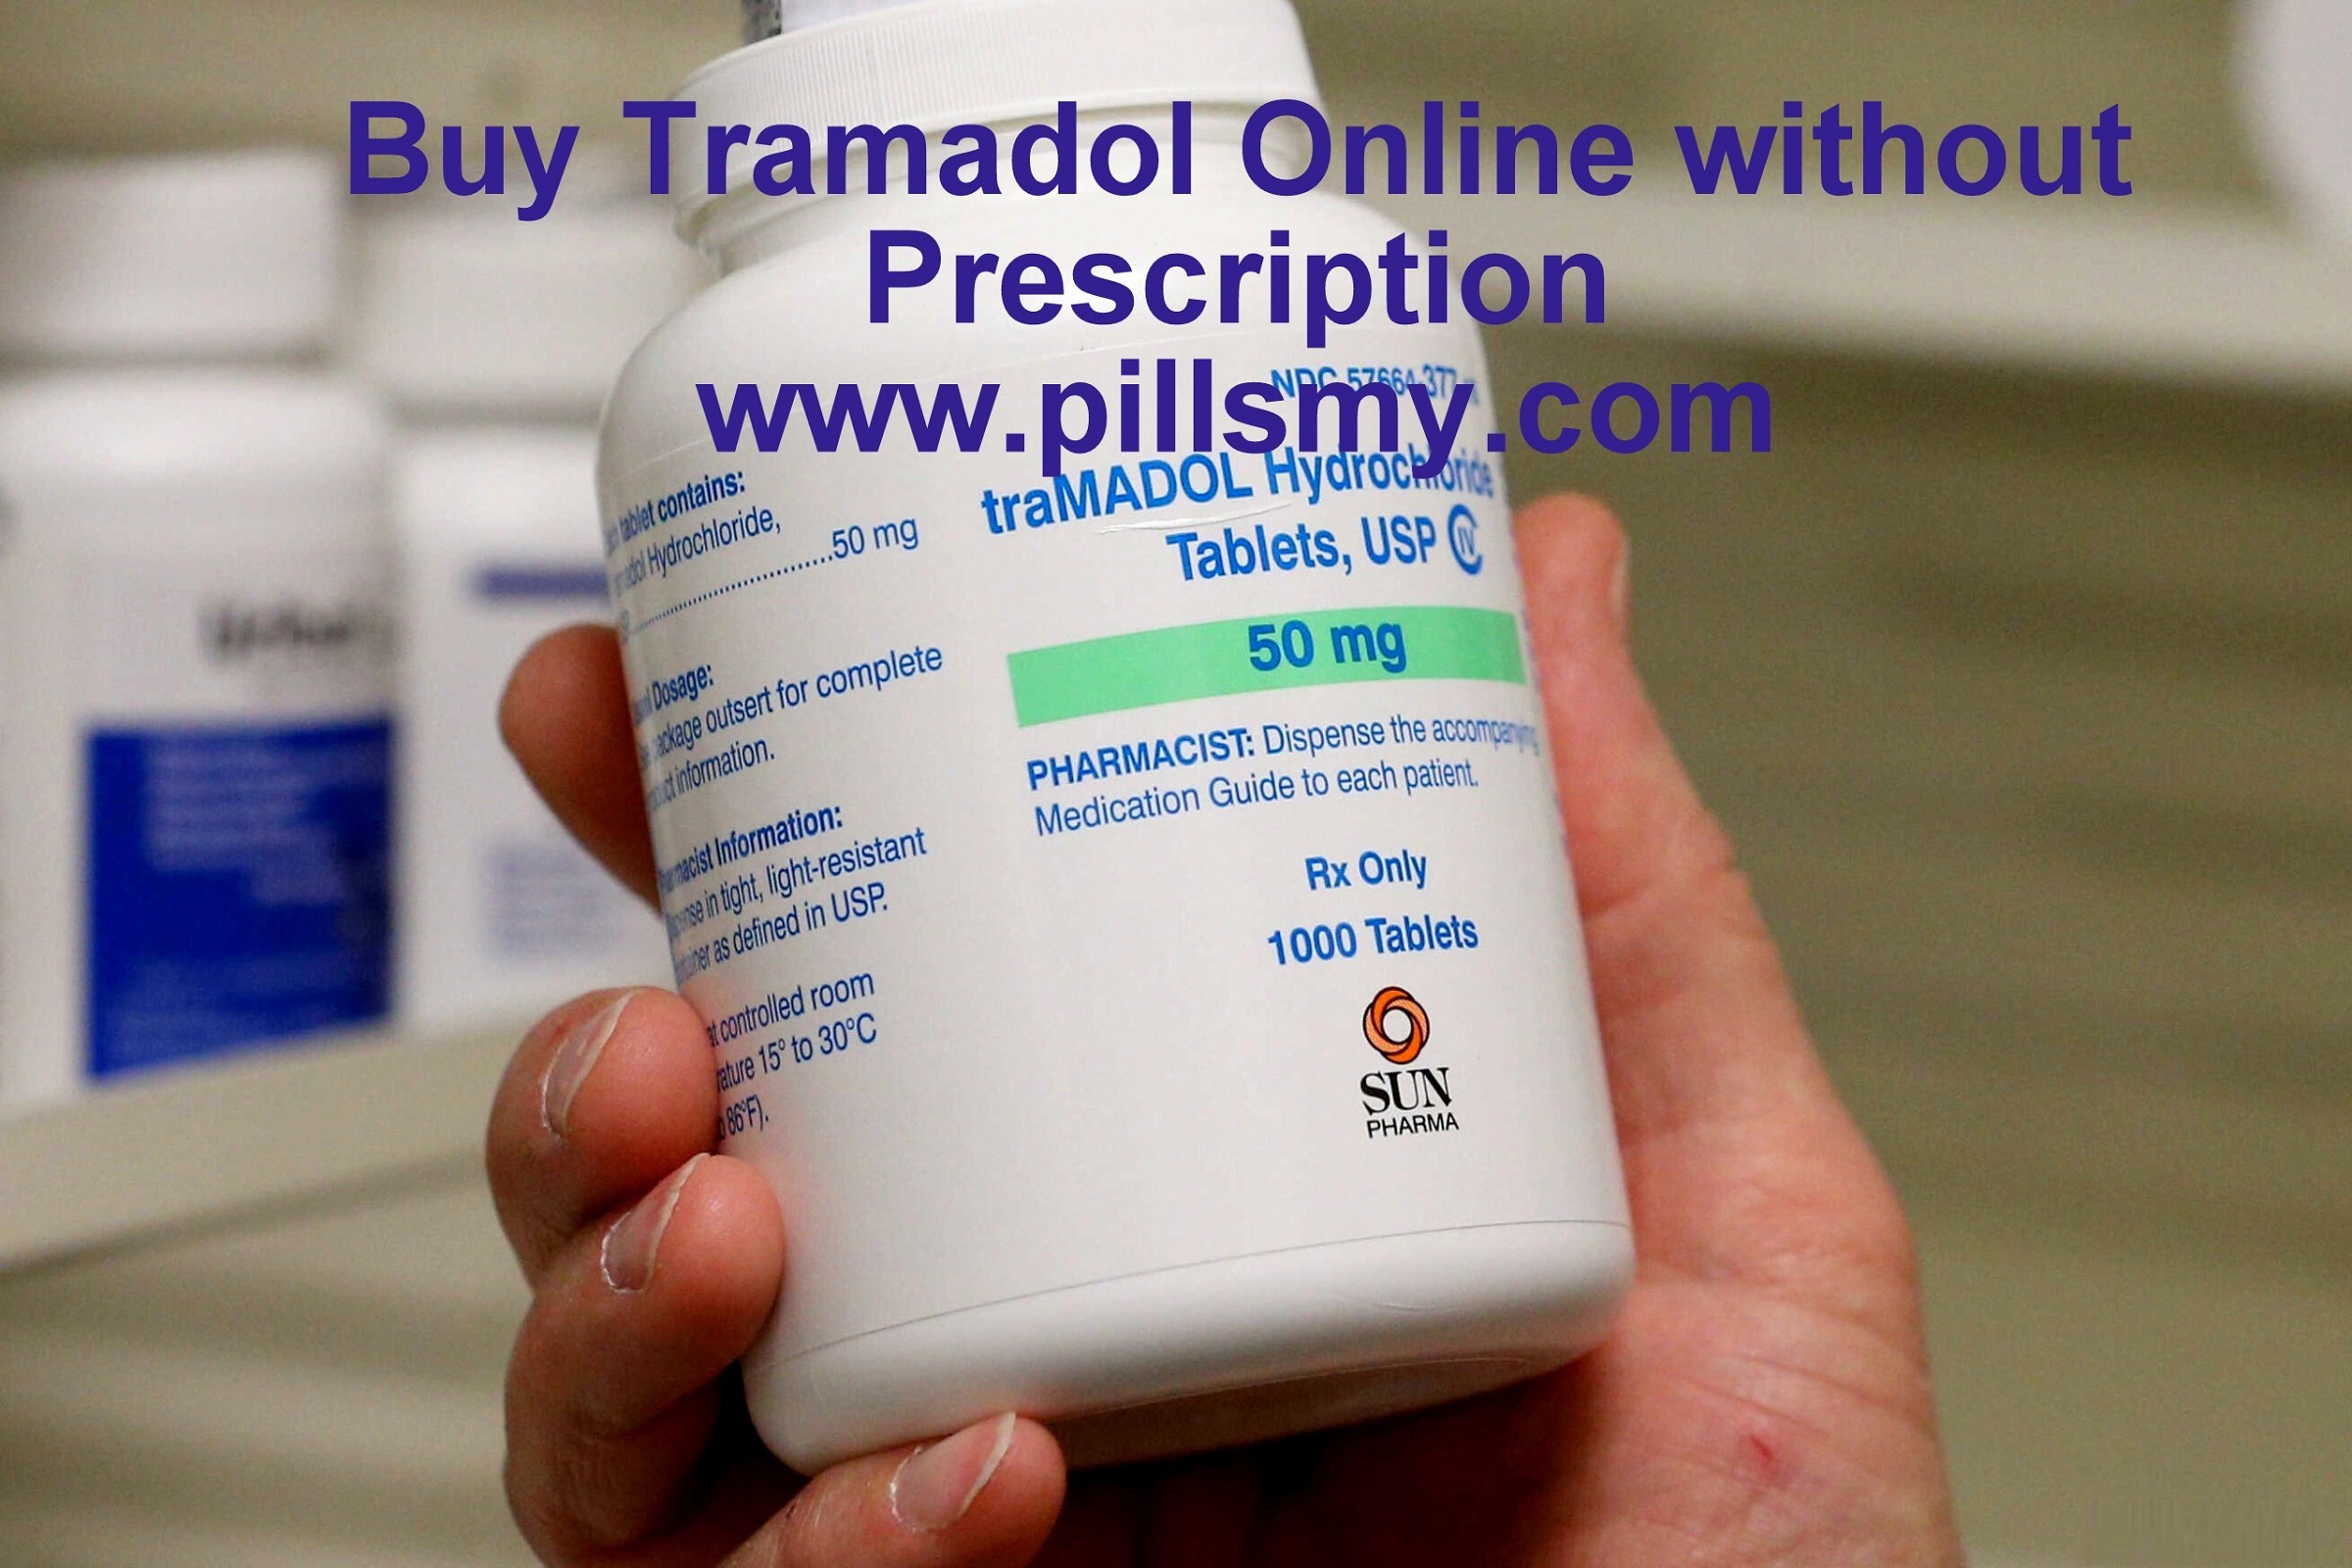 How to Buy Tramadol Online without Prescription at Discount Prices